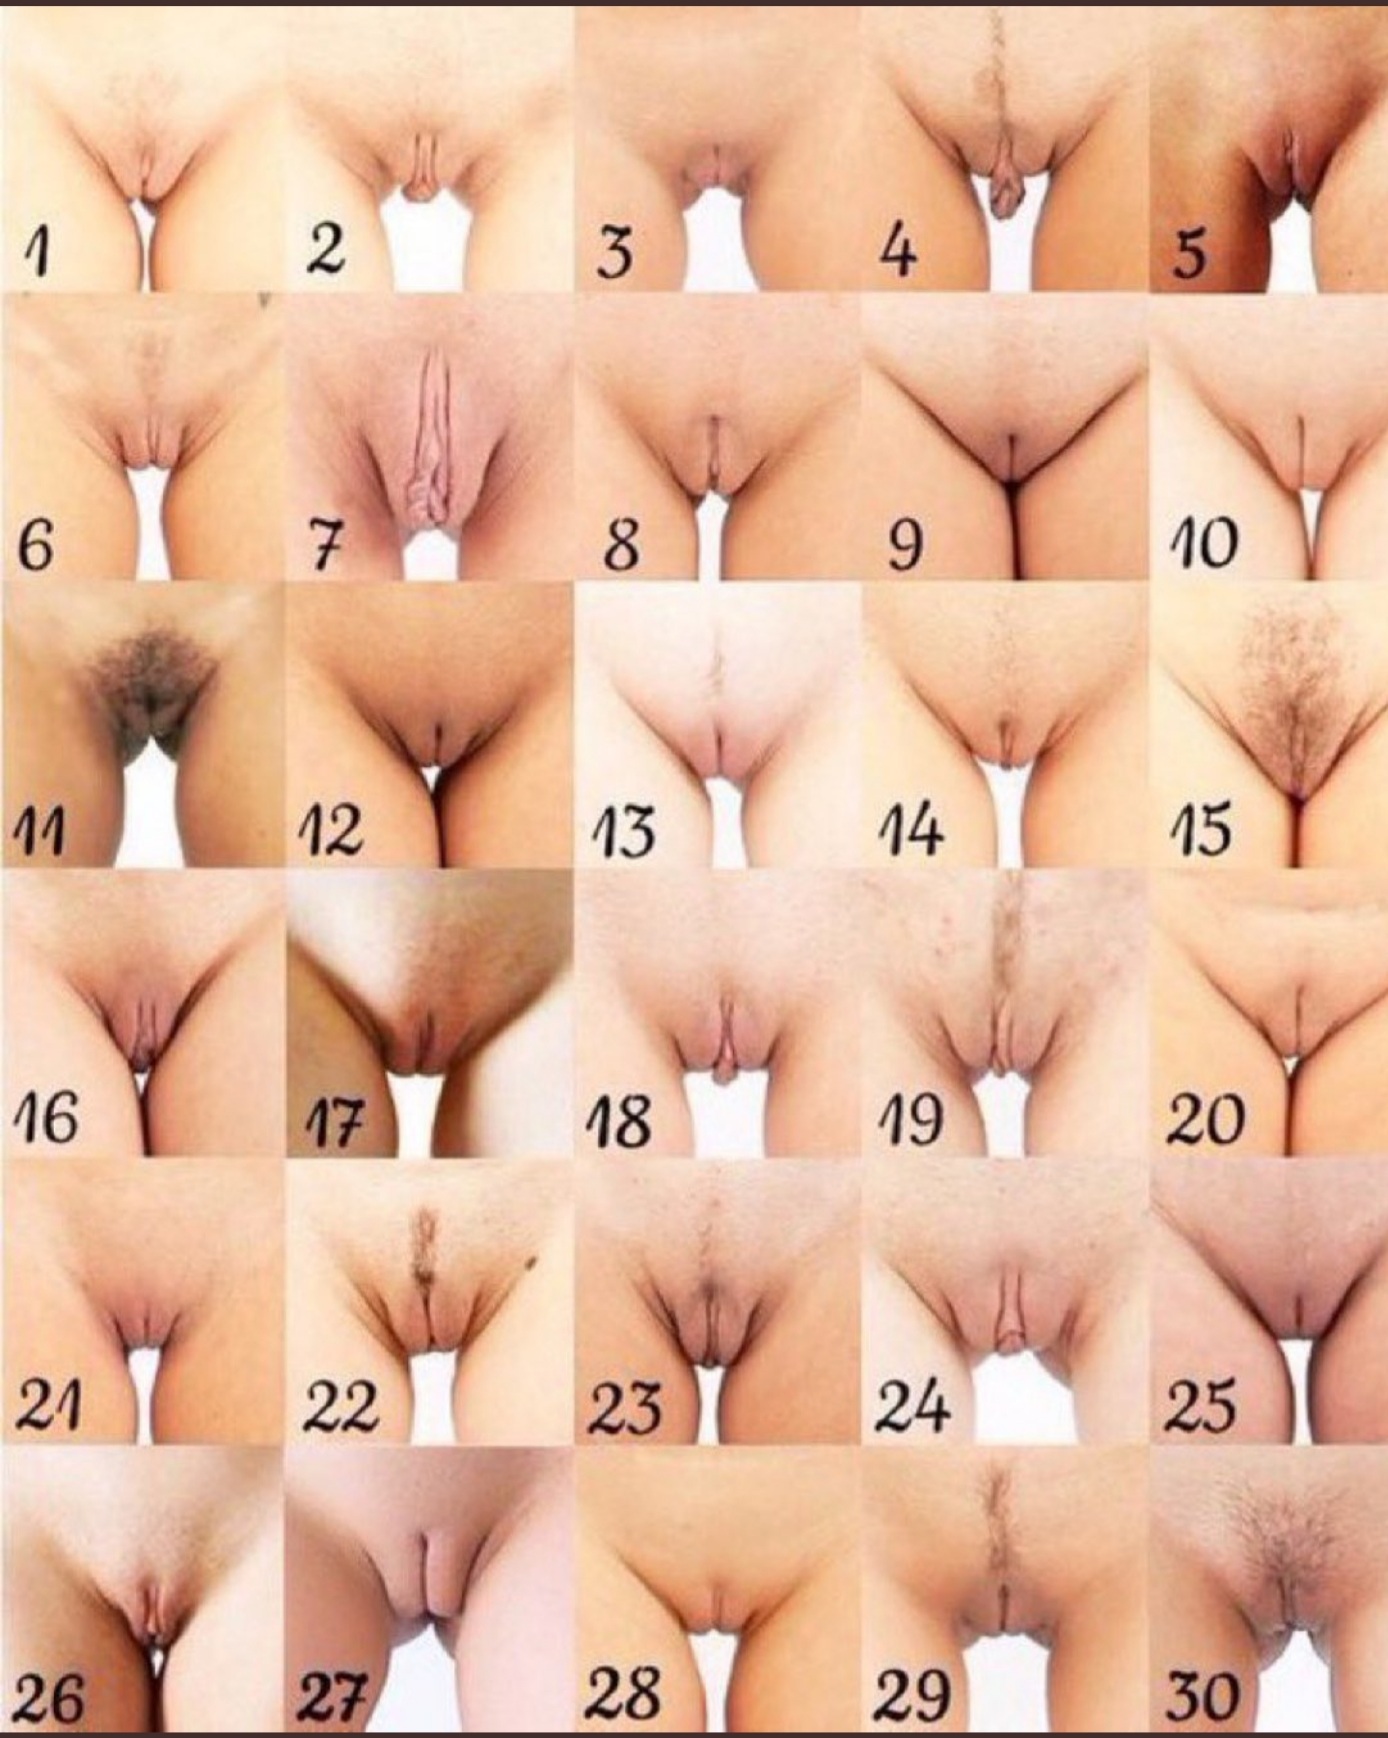 What number pussy do you have? 